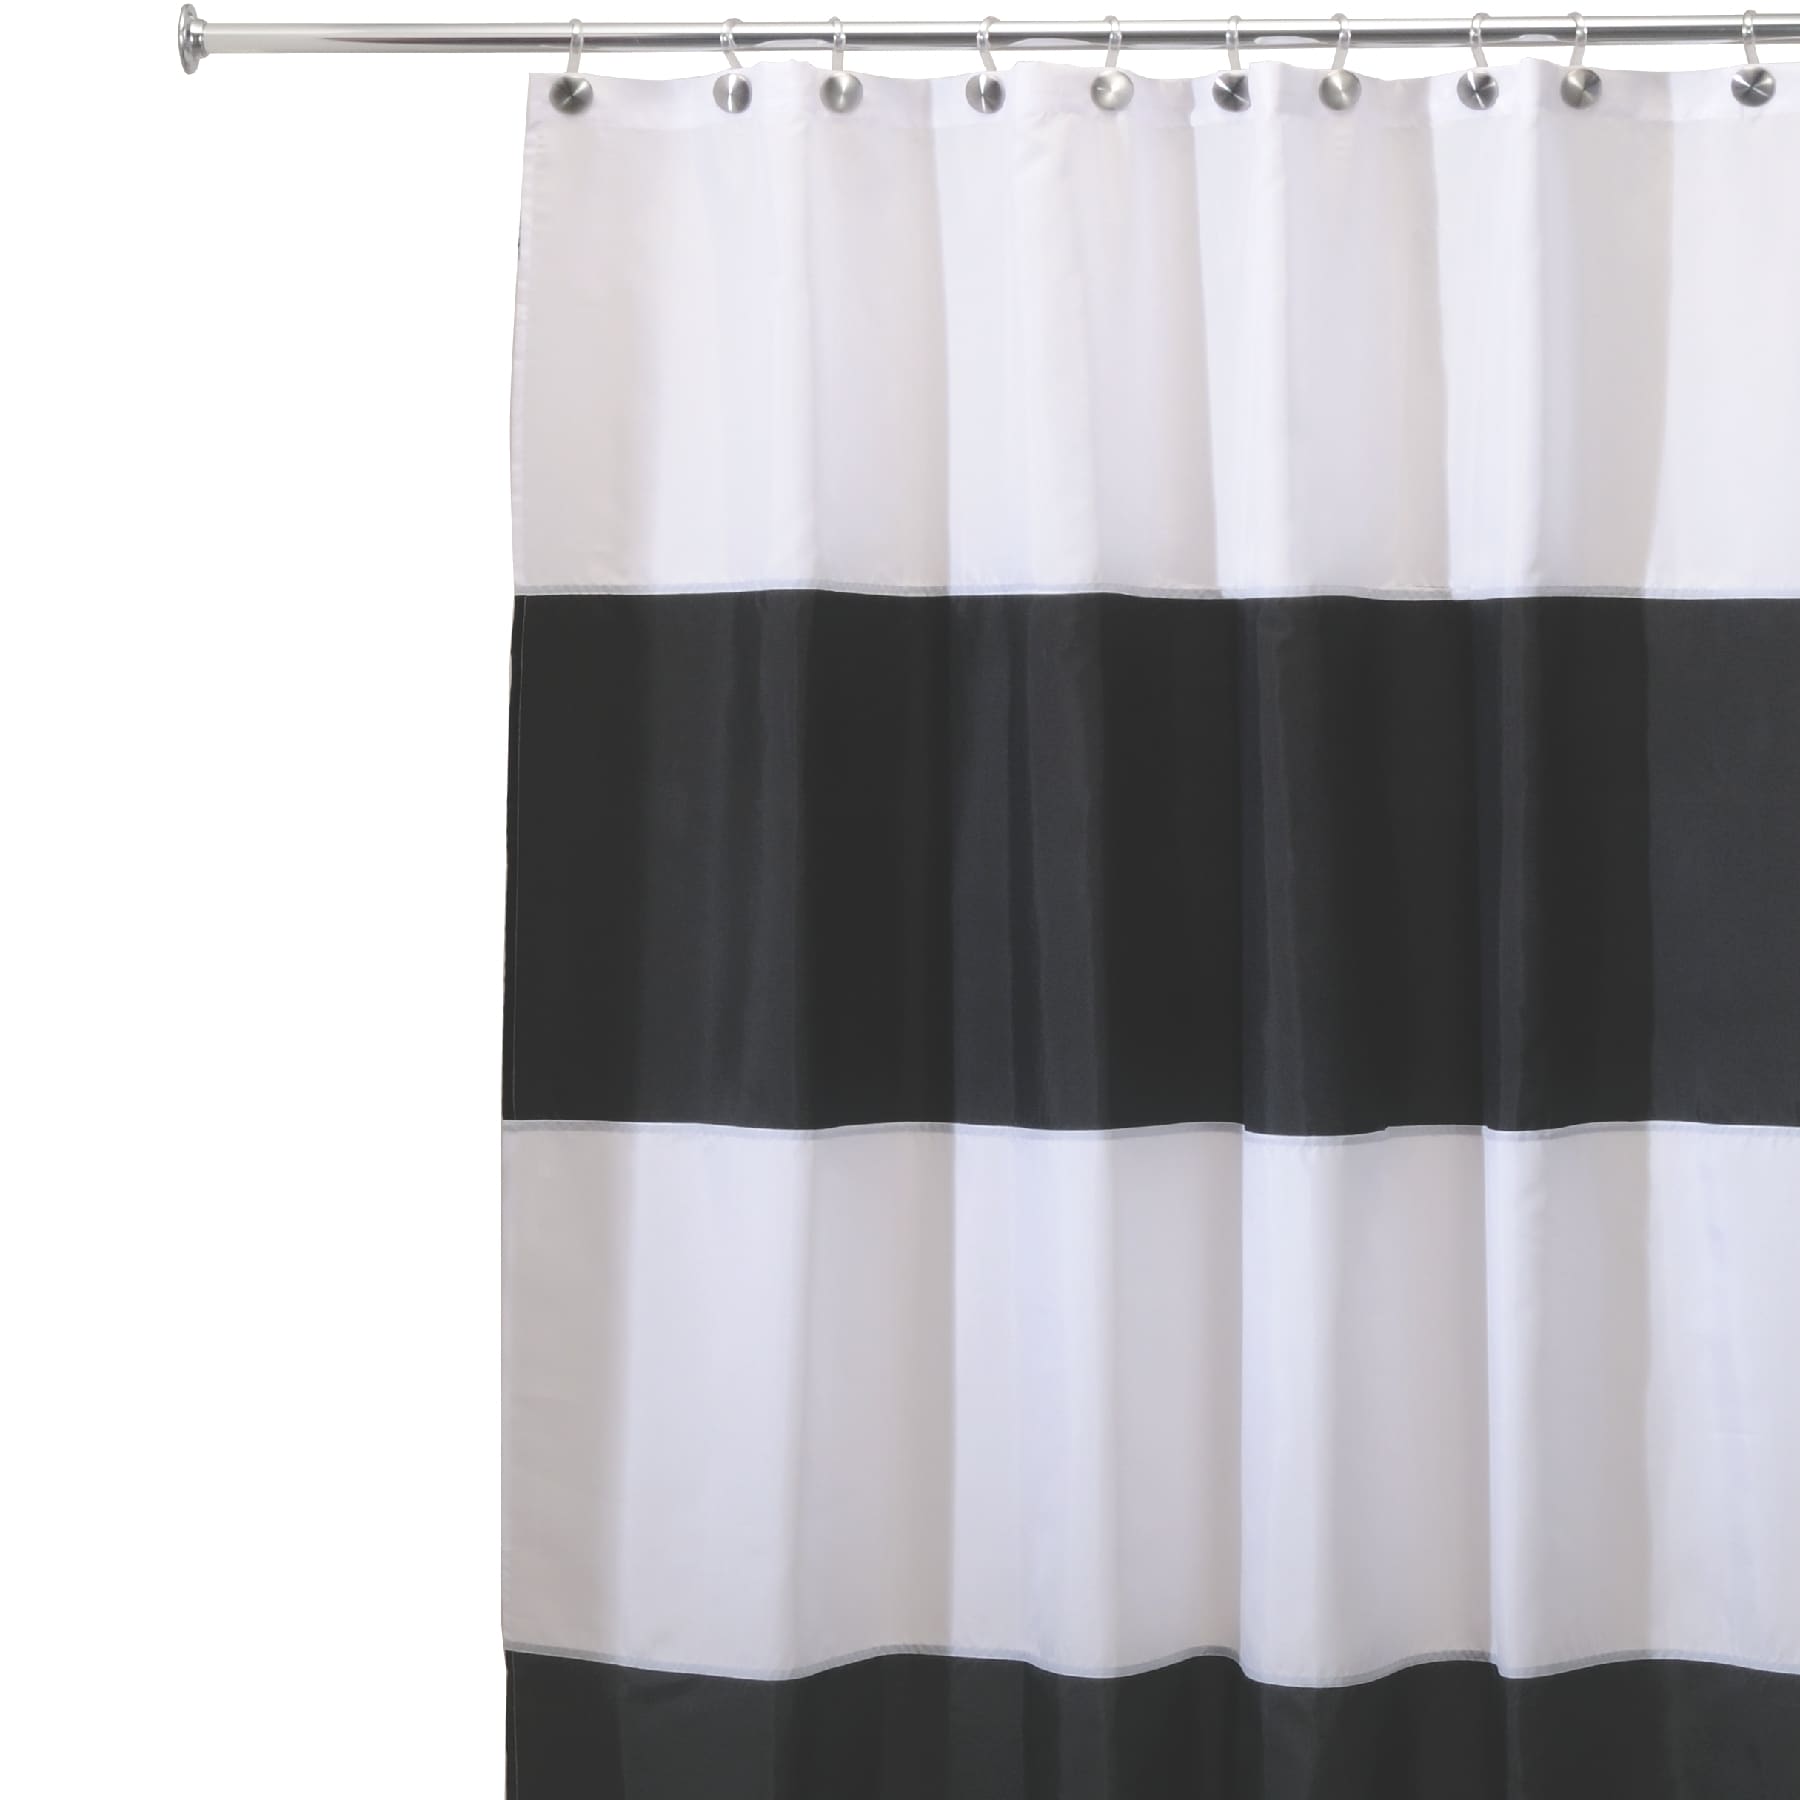 Interdesign Fabric Shower Curtain Water-Repellent And Mold And Mildew-Resistan 